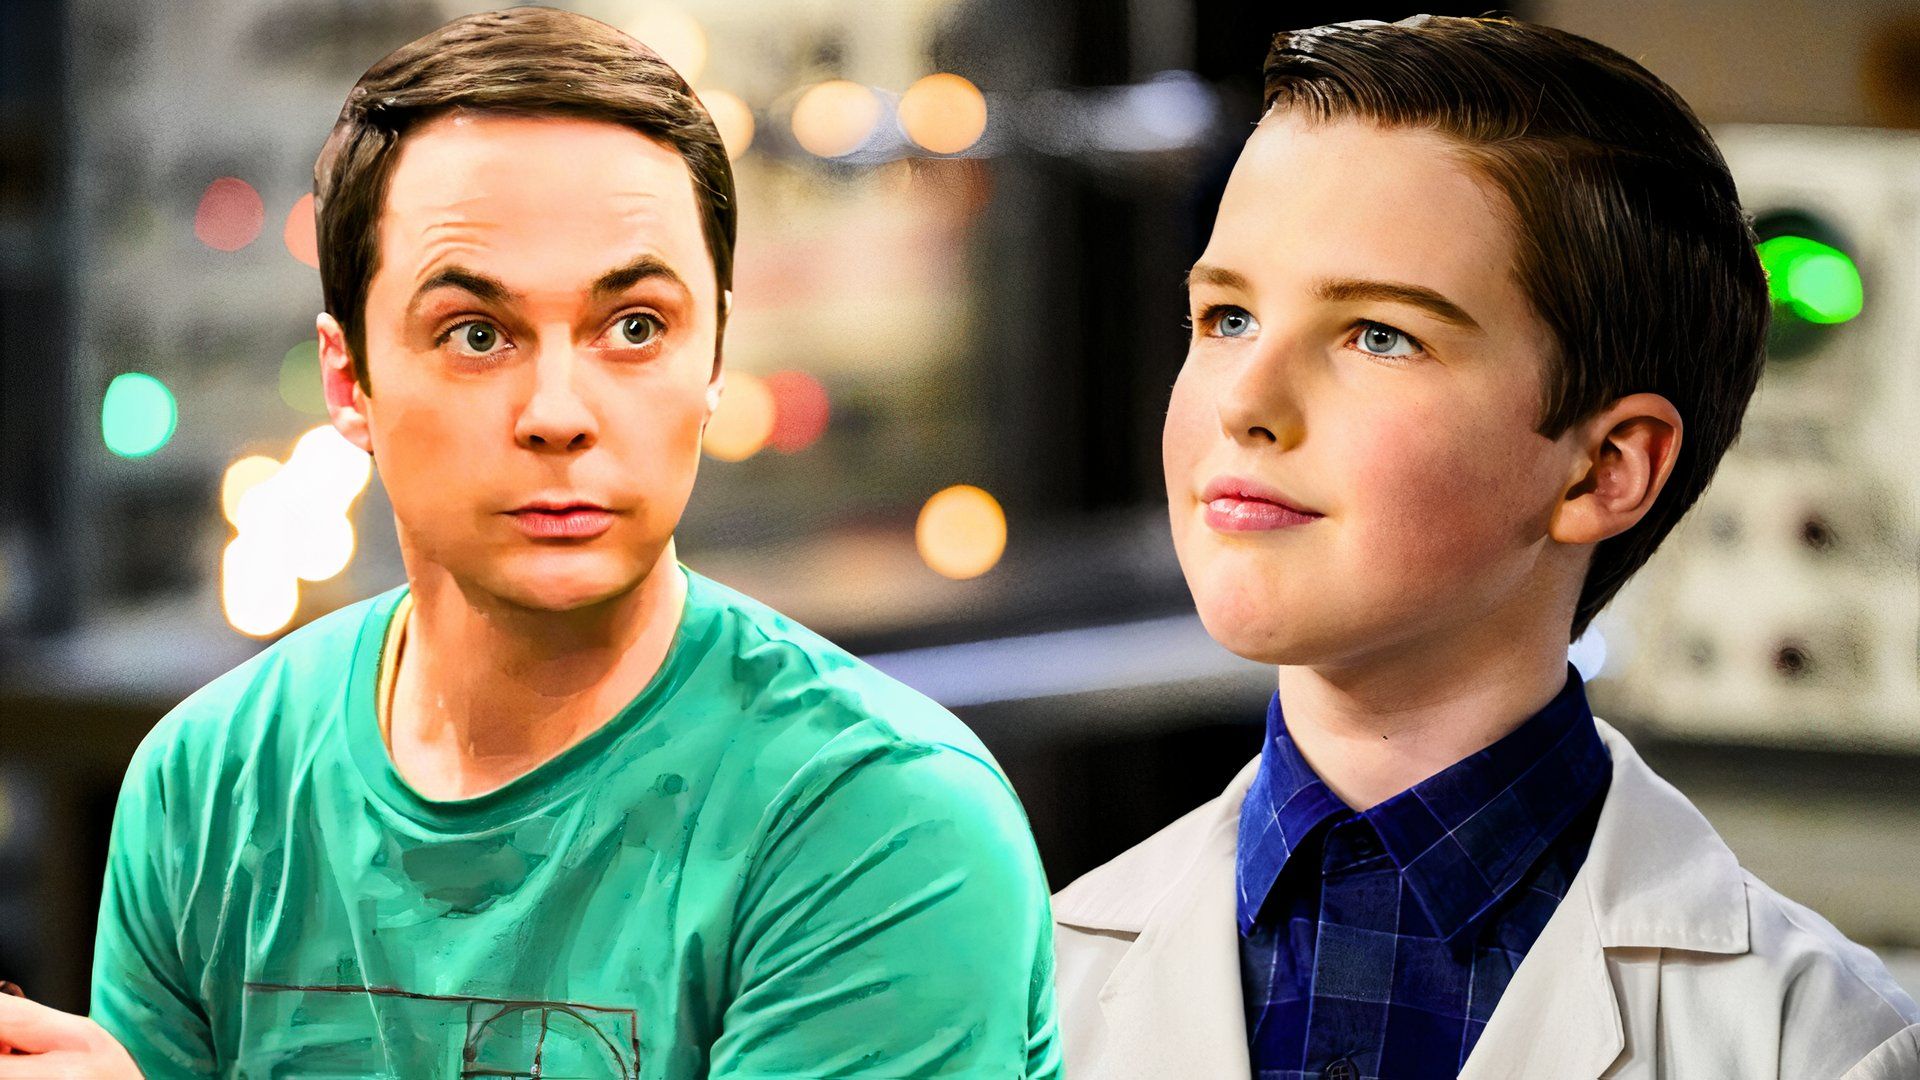 Can The Big Bang Theory Franchise Survive Without Sheldon